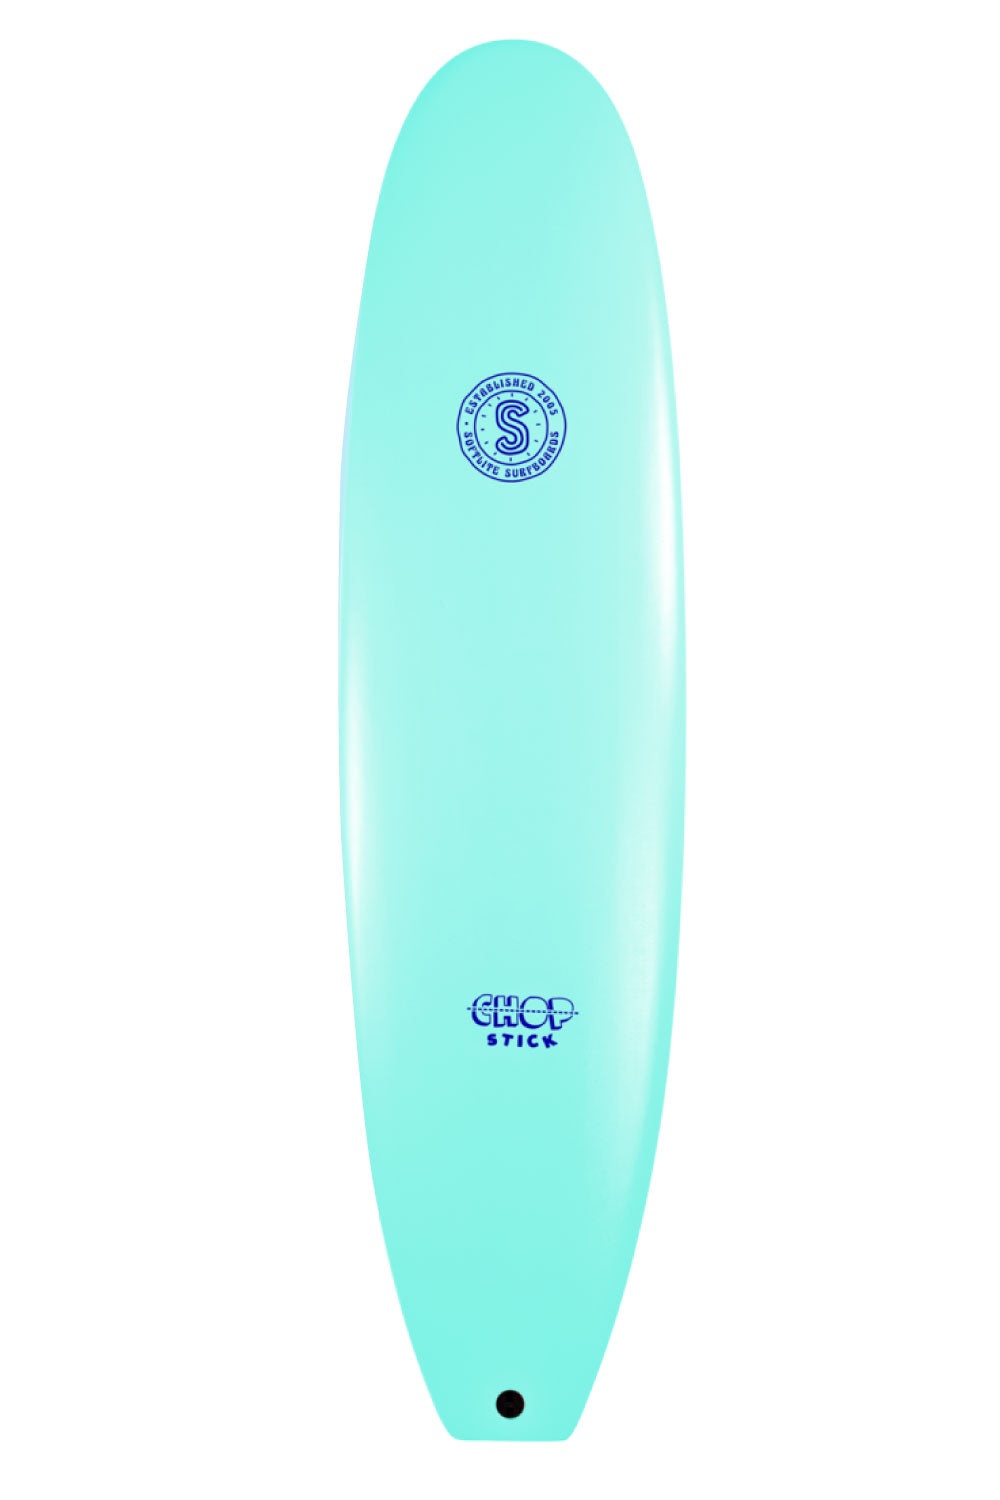 7'6 Softlite Chop Stick Softboard - Comes with fins